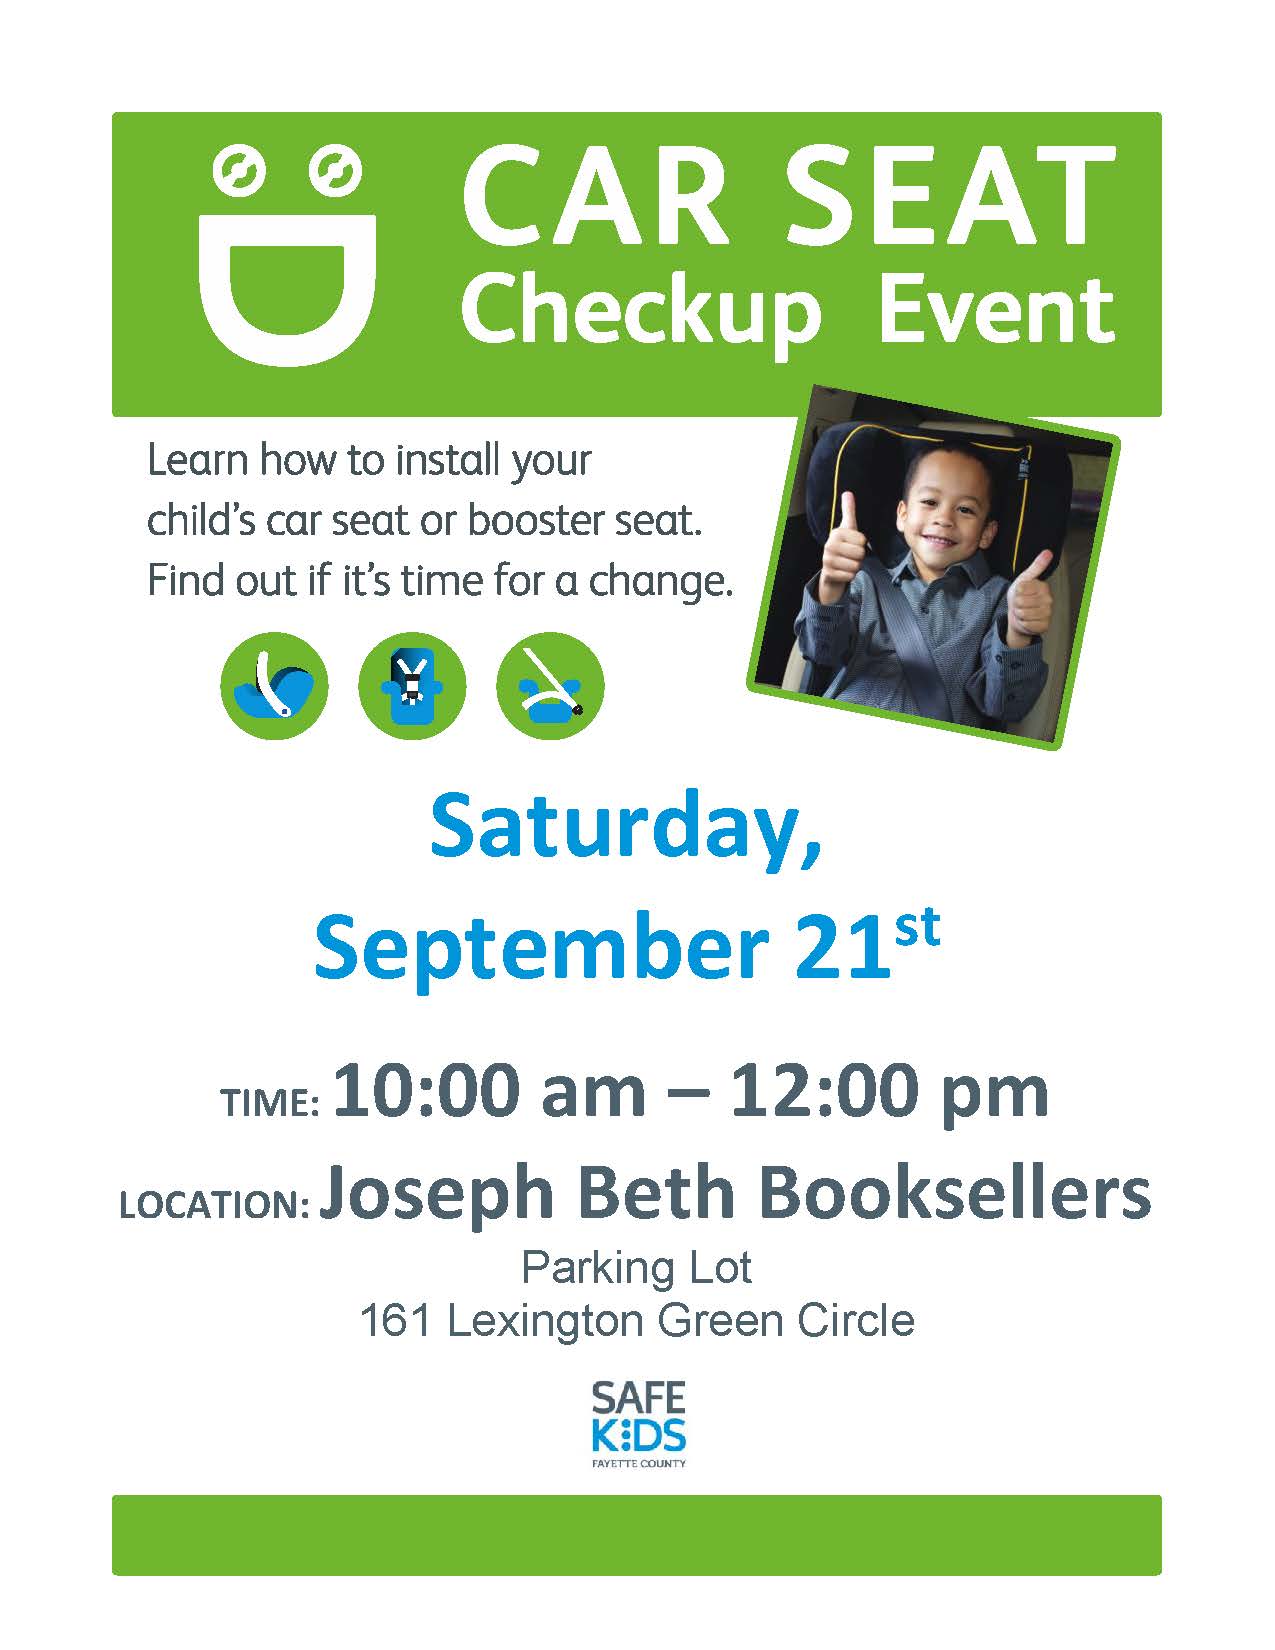 Car Seat Checkup event to be held Sept. 21